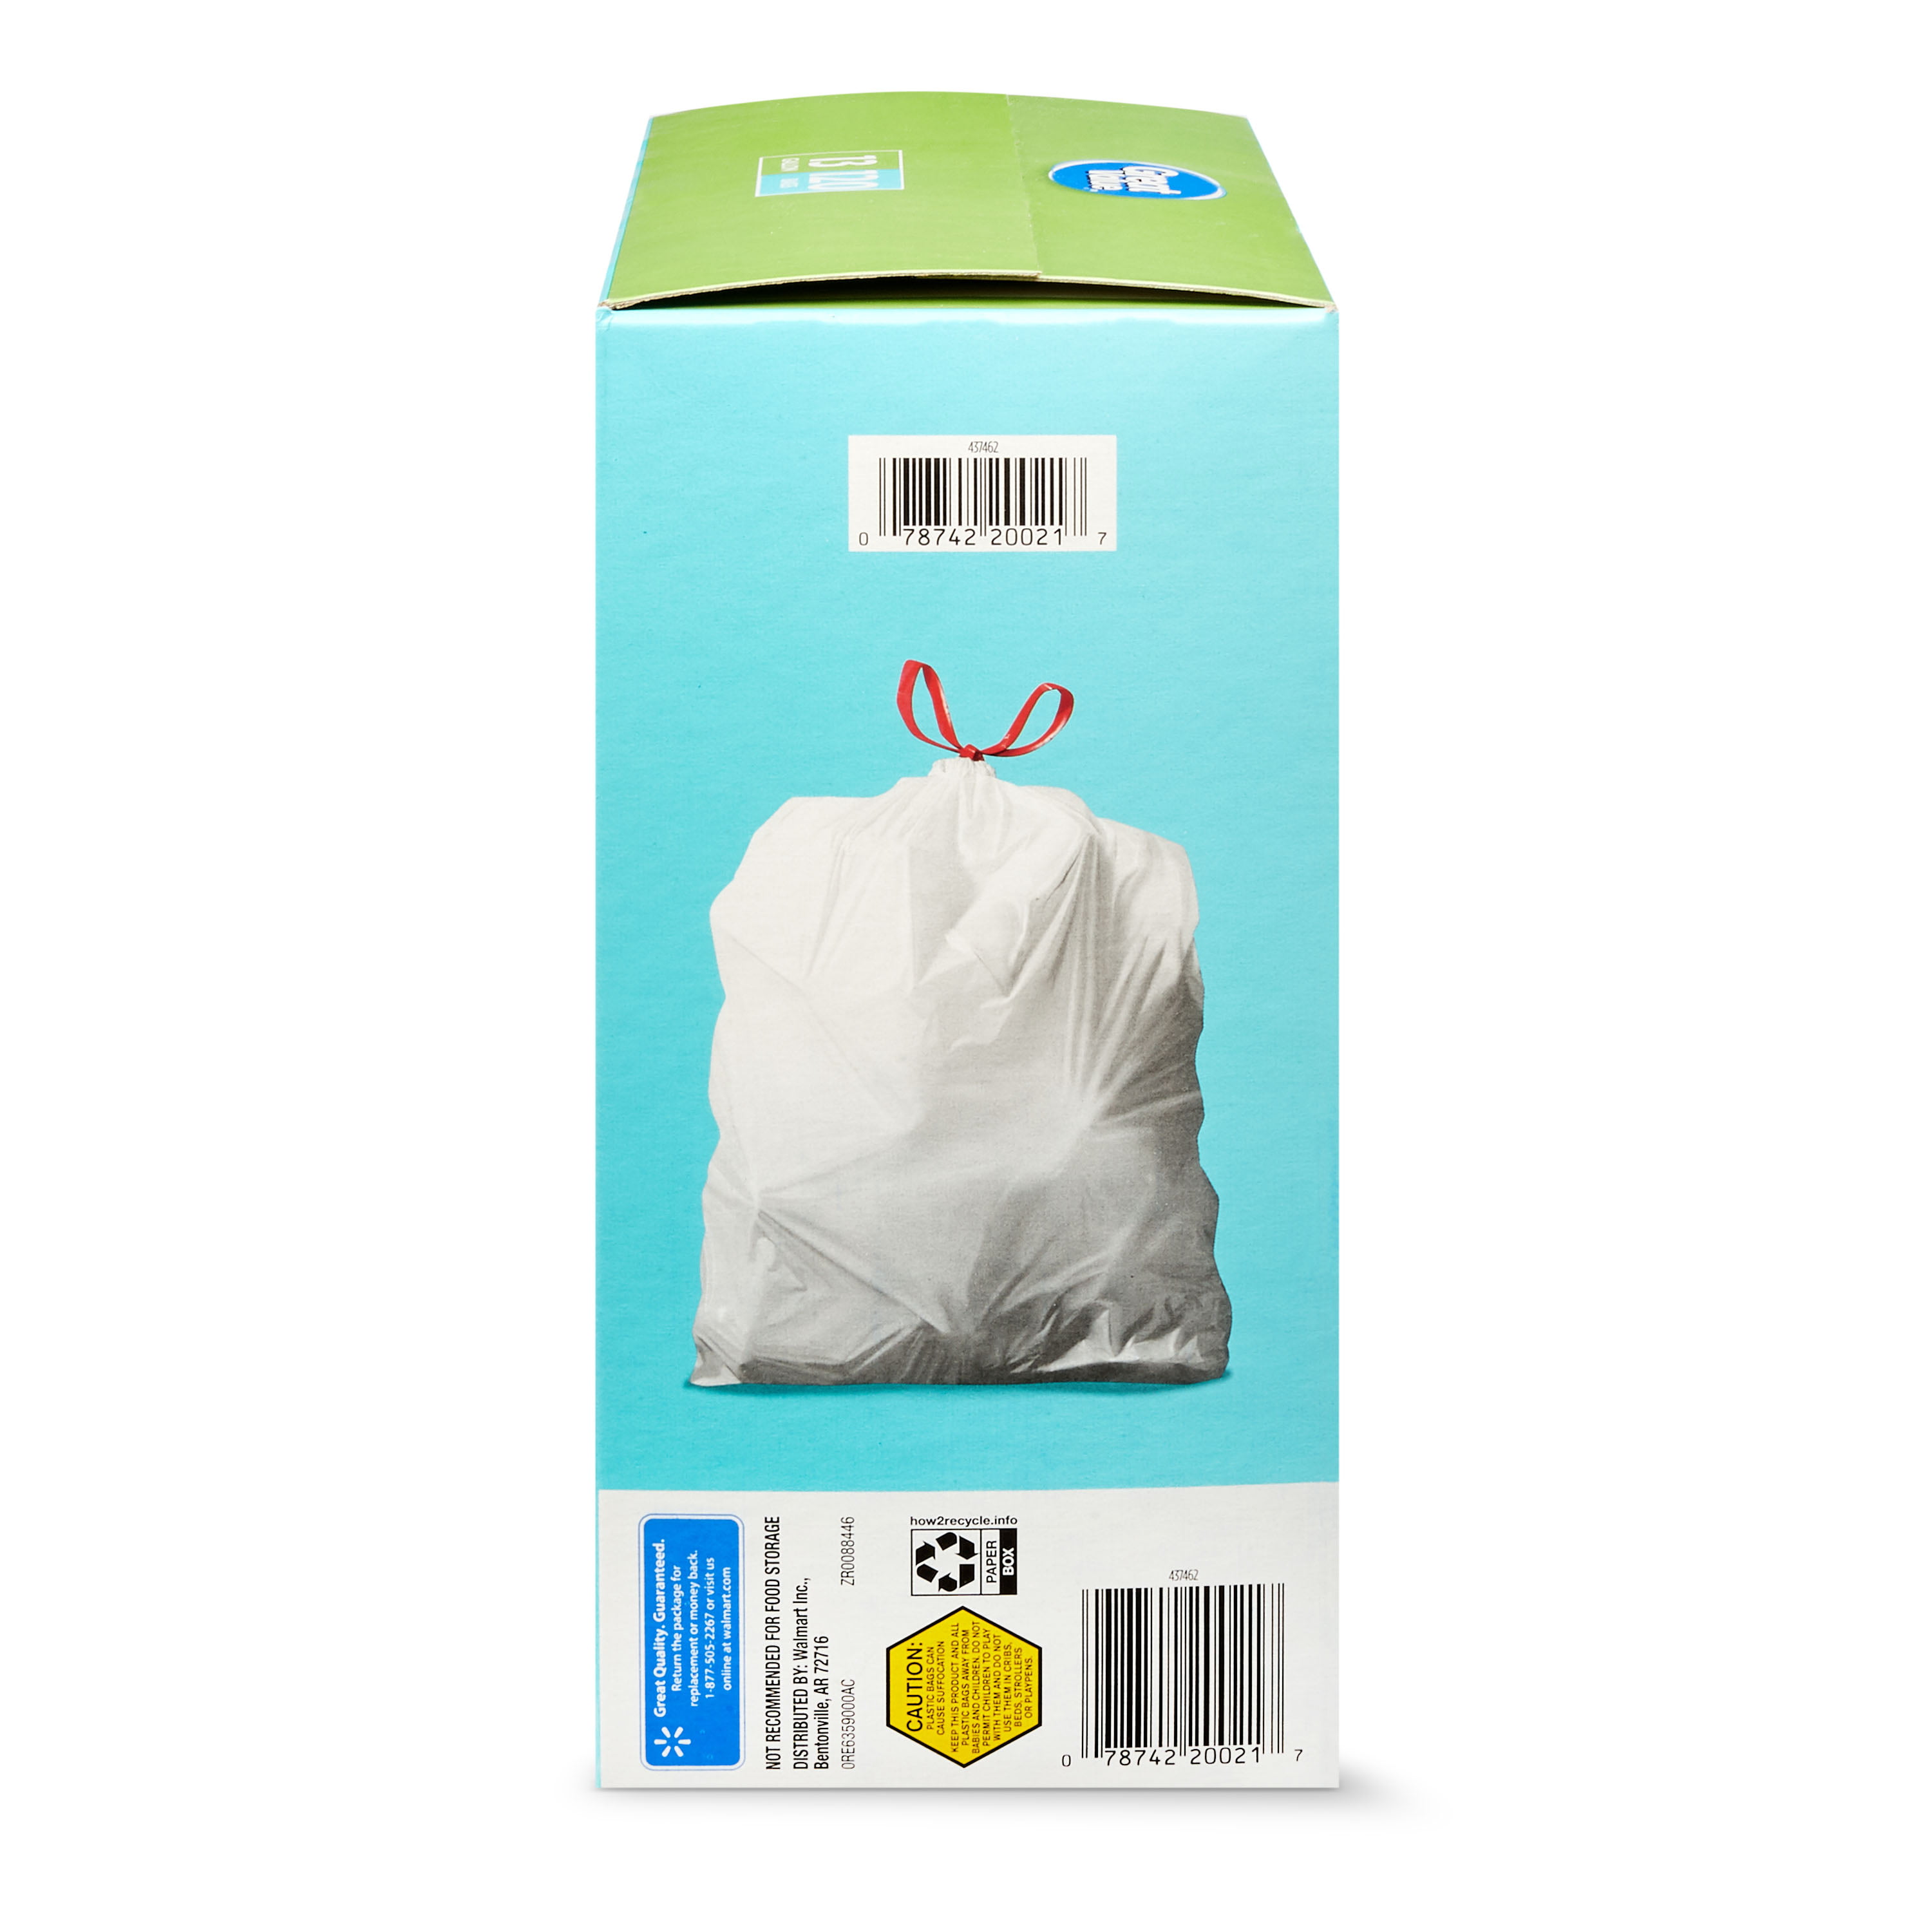 neat 13 Gallon Drawstring Trash Bags - (Mega 200 Count) - Triple Ply  Fortified, Eco-Friendly 50% Recycled Material, Neutralize+ Odor Technology